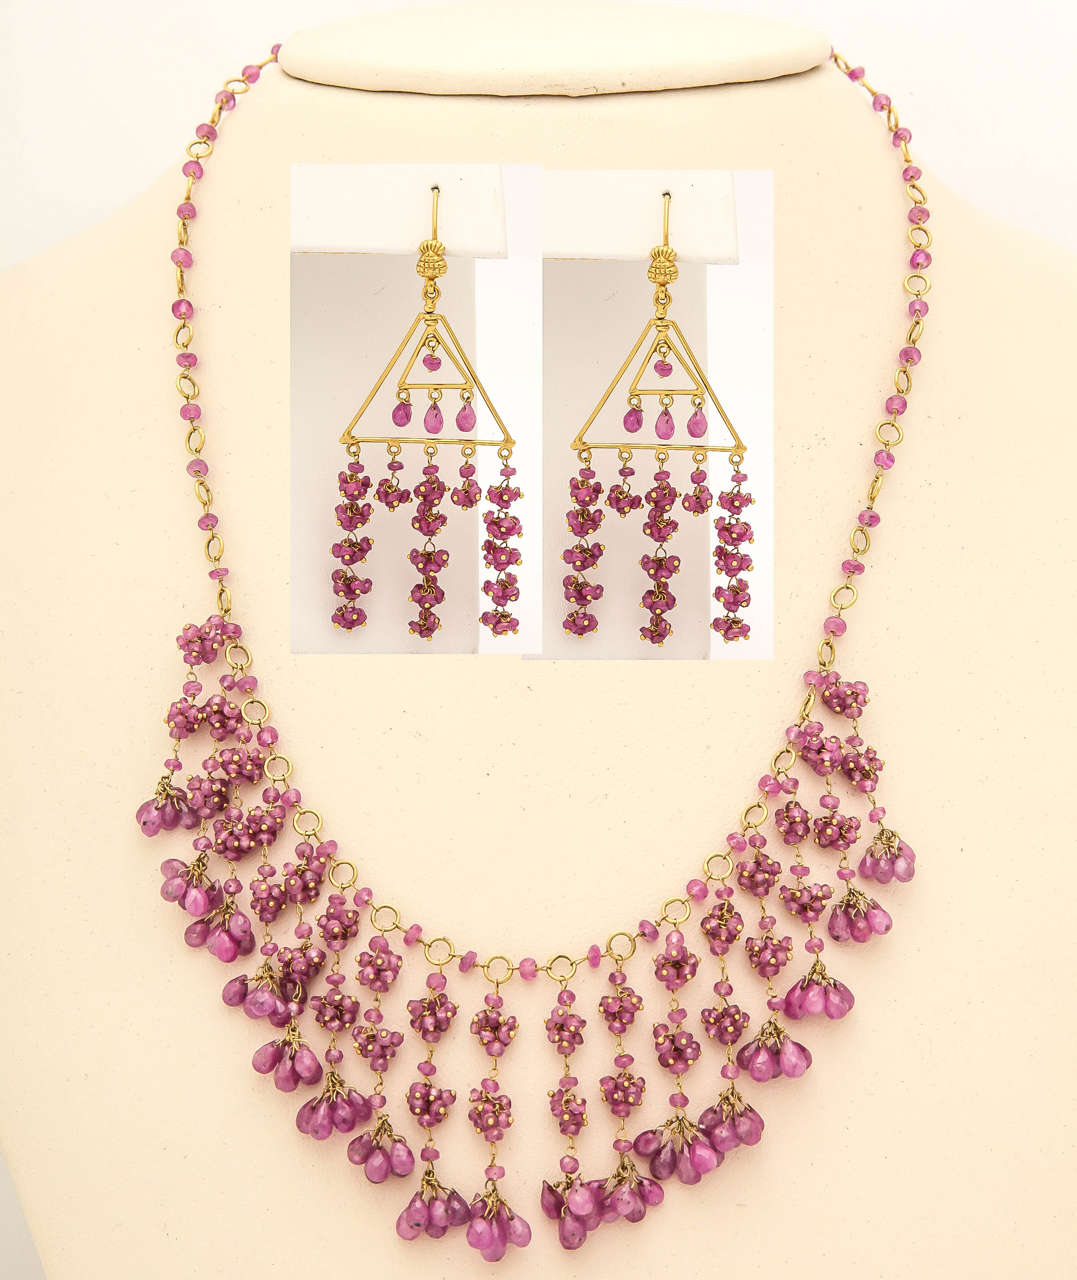 This delicate ruby/pink sapphire bead necklace and earring set is all hand wired in 18 kt yellow gold. The dangles are clusters of ruby beads with ruby briolettes on the end of each unit. This necklace and earrings moves beautifully and create and